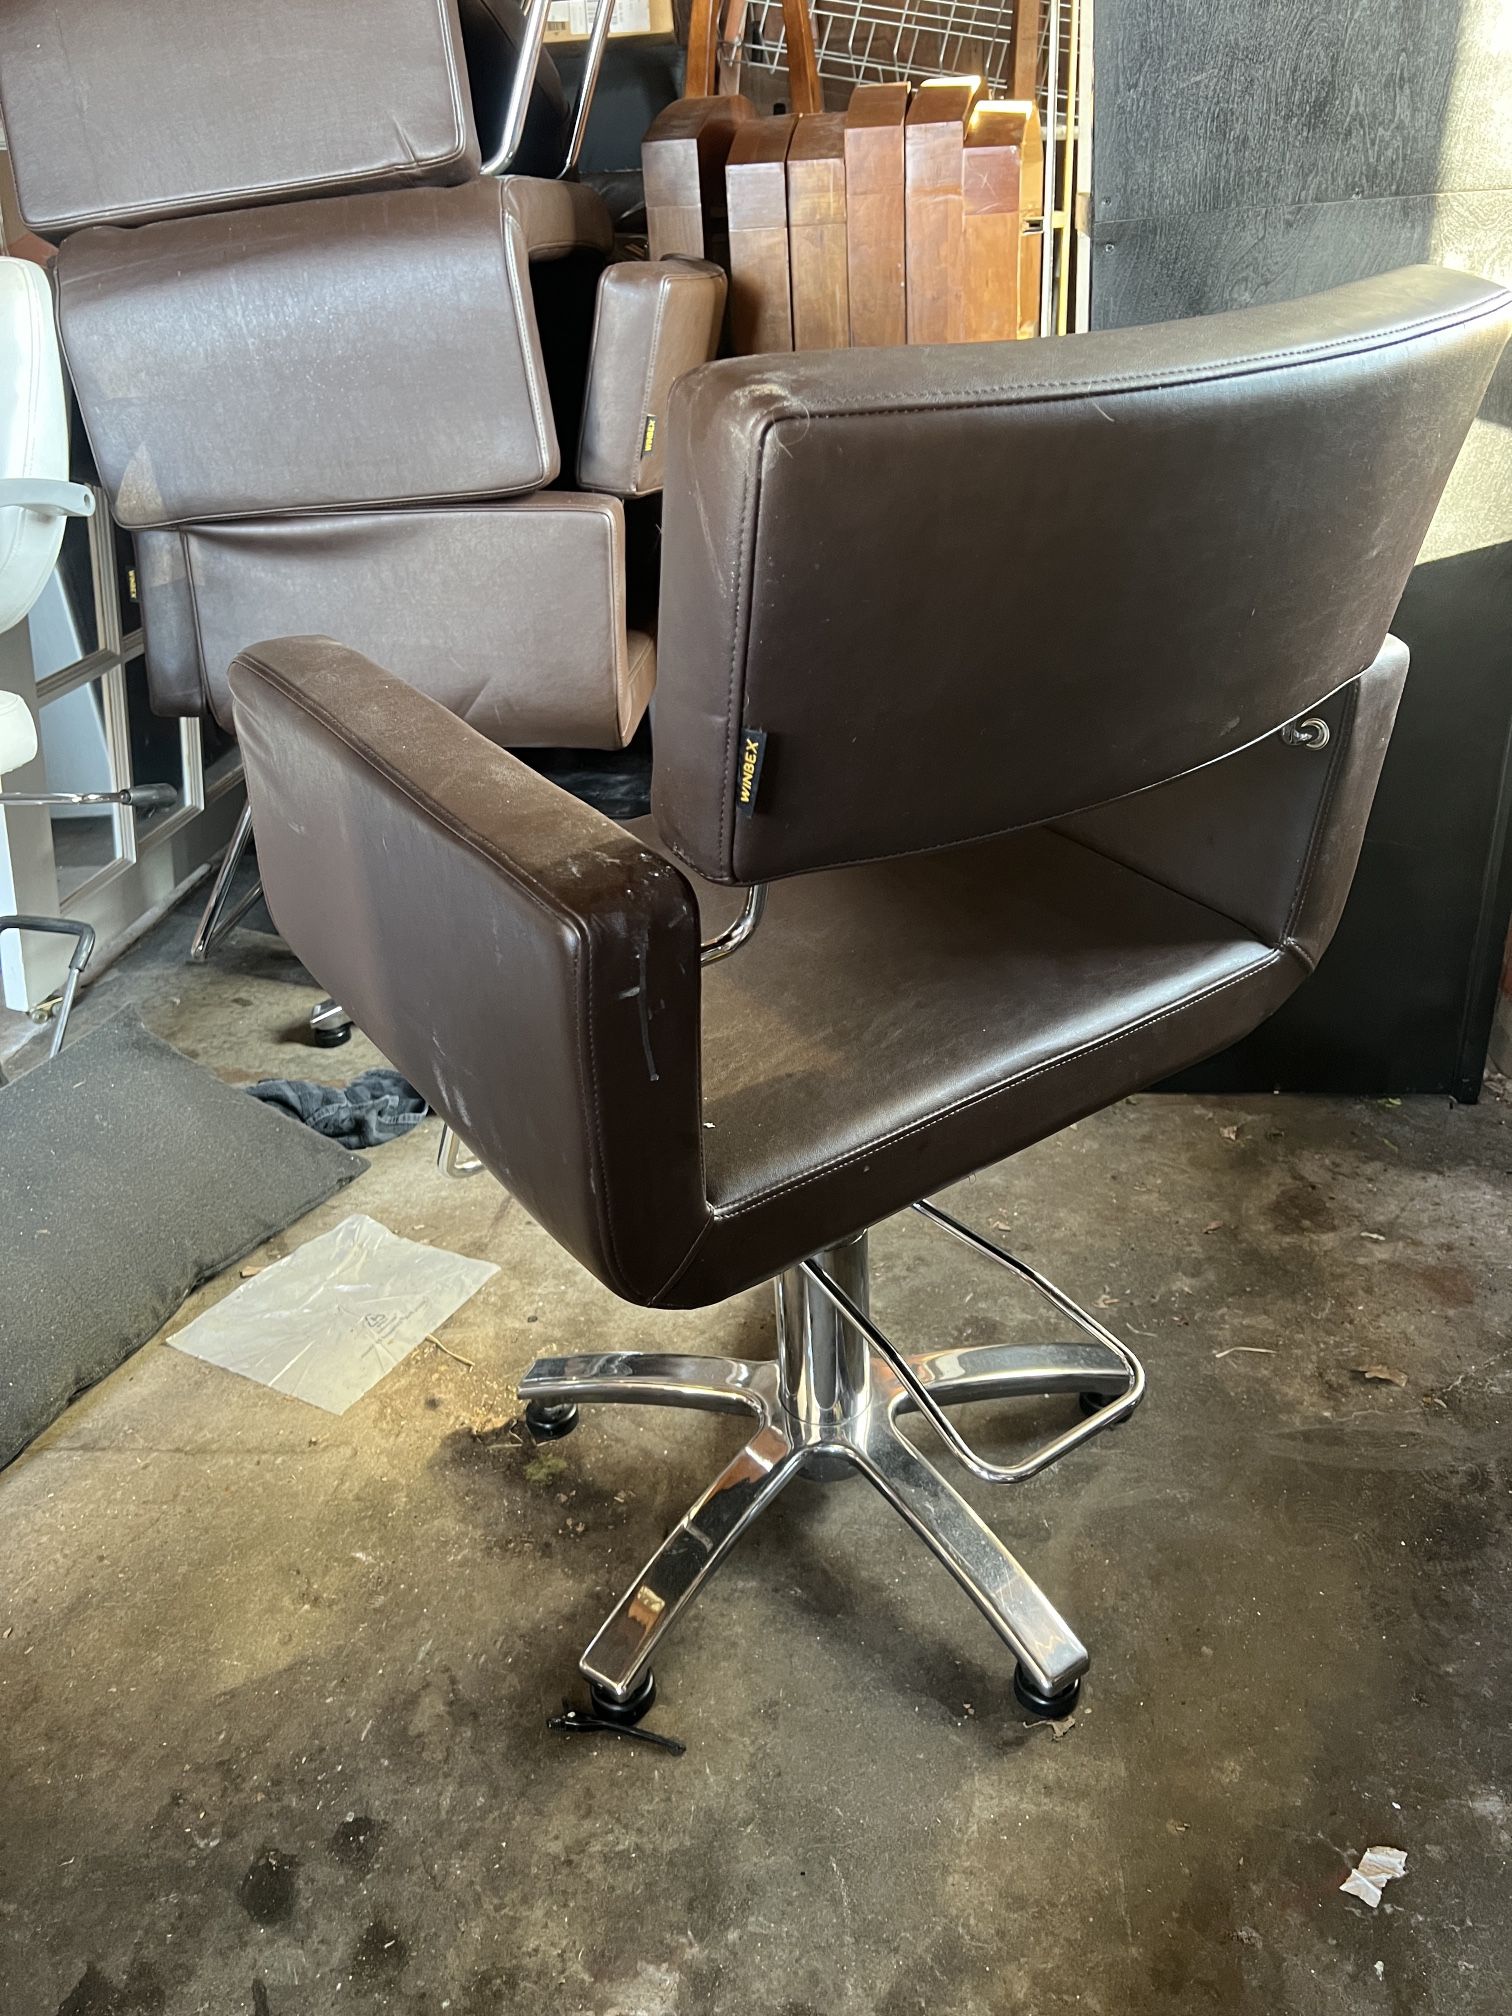 Hairdresser/Barber Chairs 